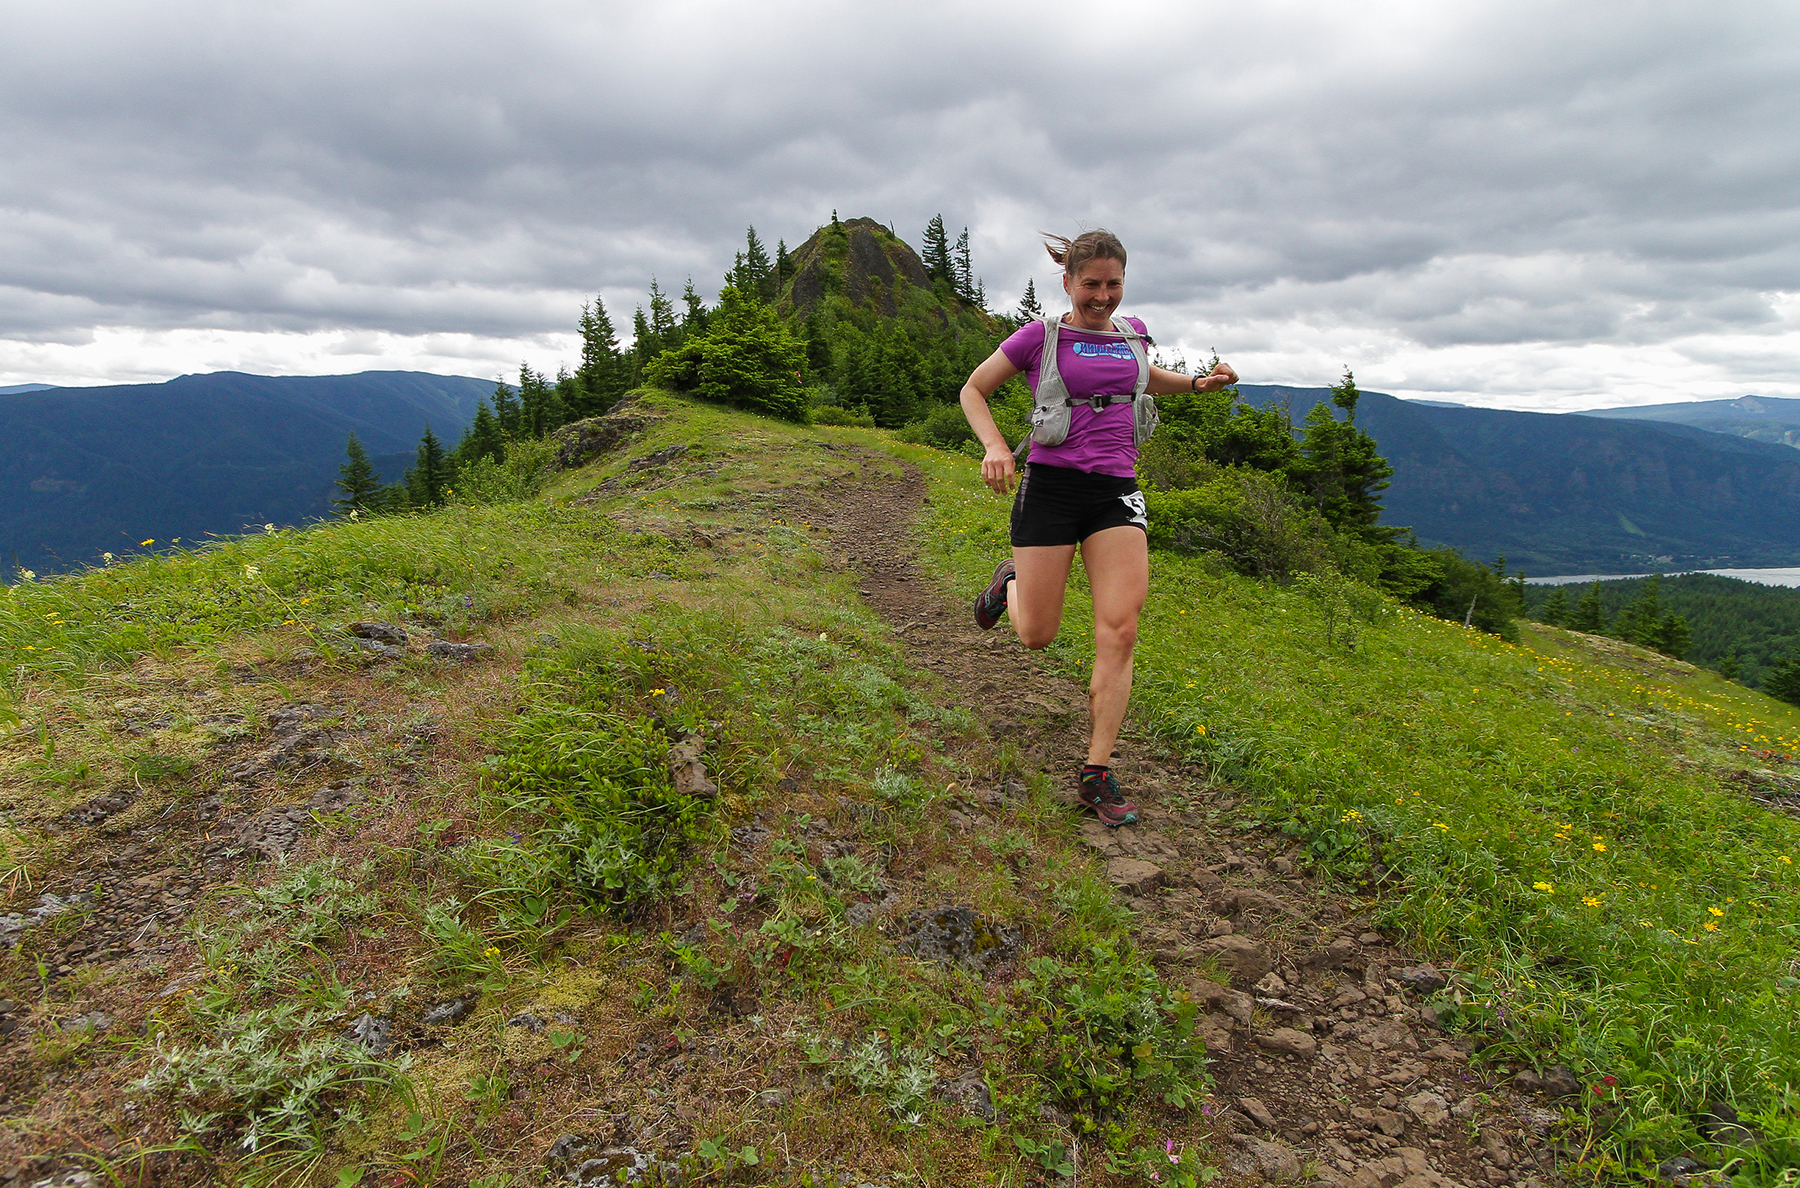 On Off The Couch, we talk to Marta Fisher about how her experience at Hardrock 100 led her to the creation of Women Who FKT; what the near-term goals of the group are; how to get involved; and more.